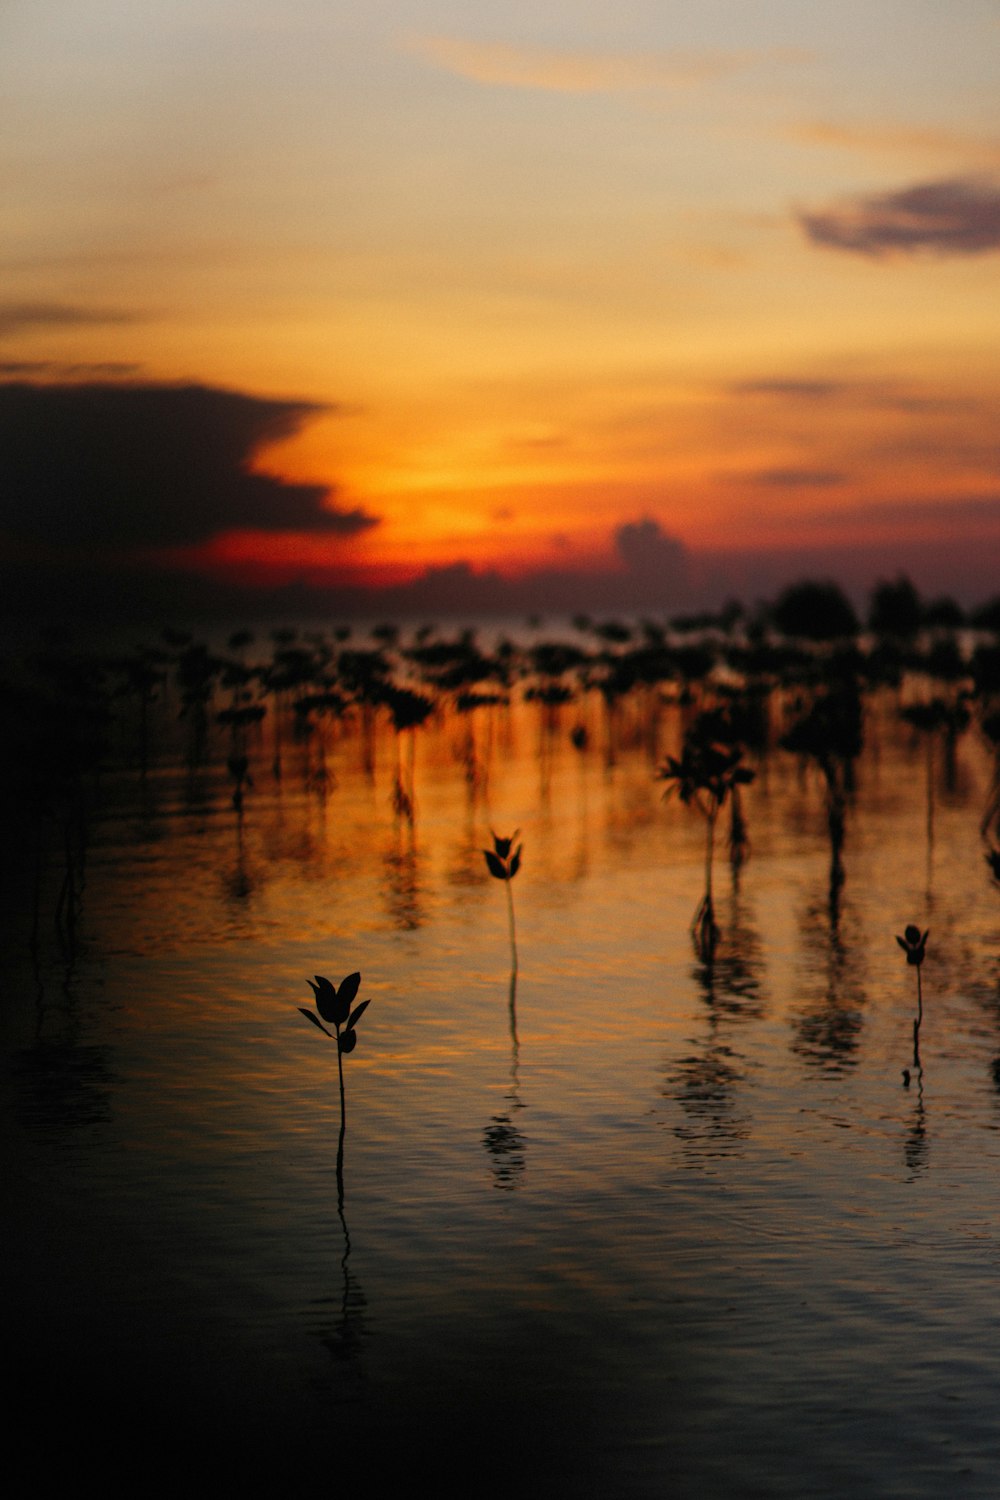 a sunset over a body of water with plants in the foreground